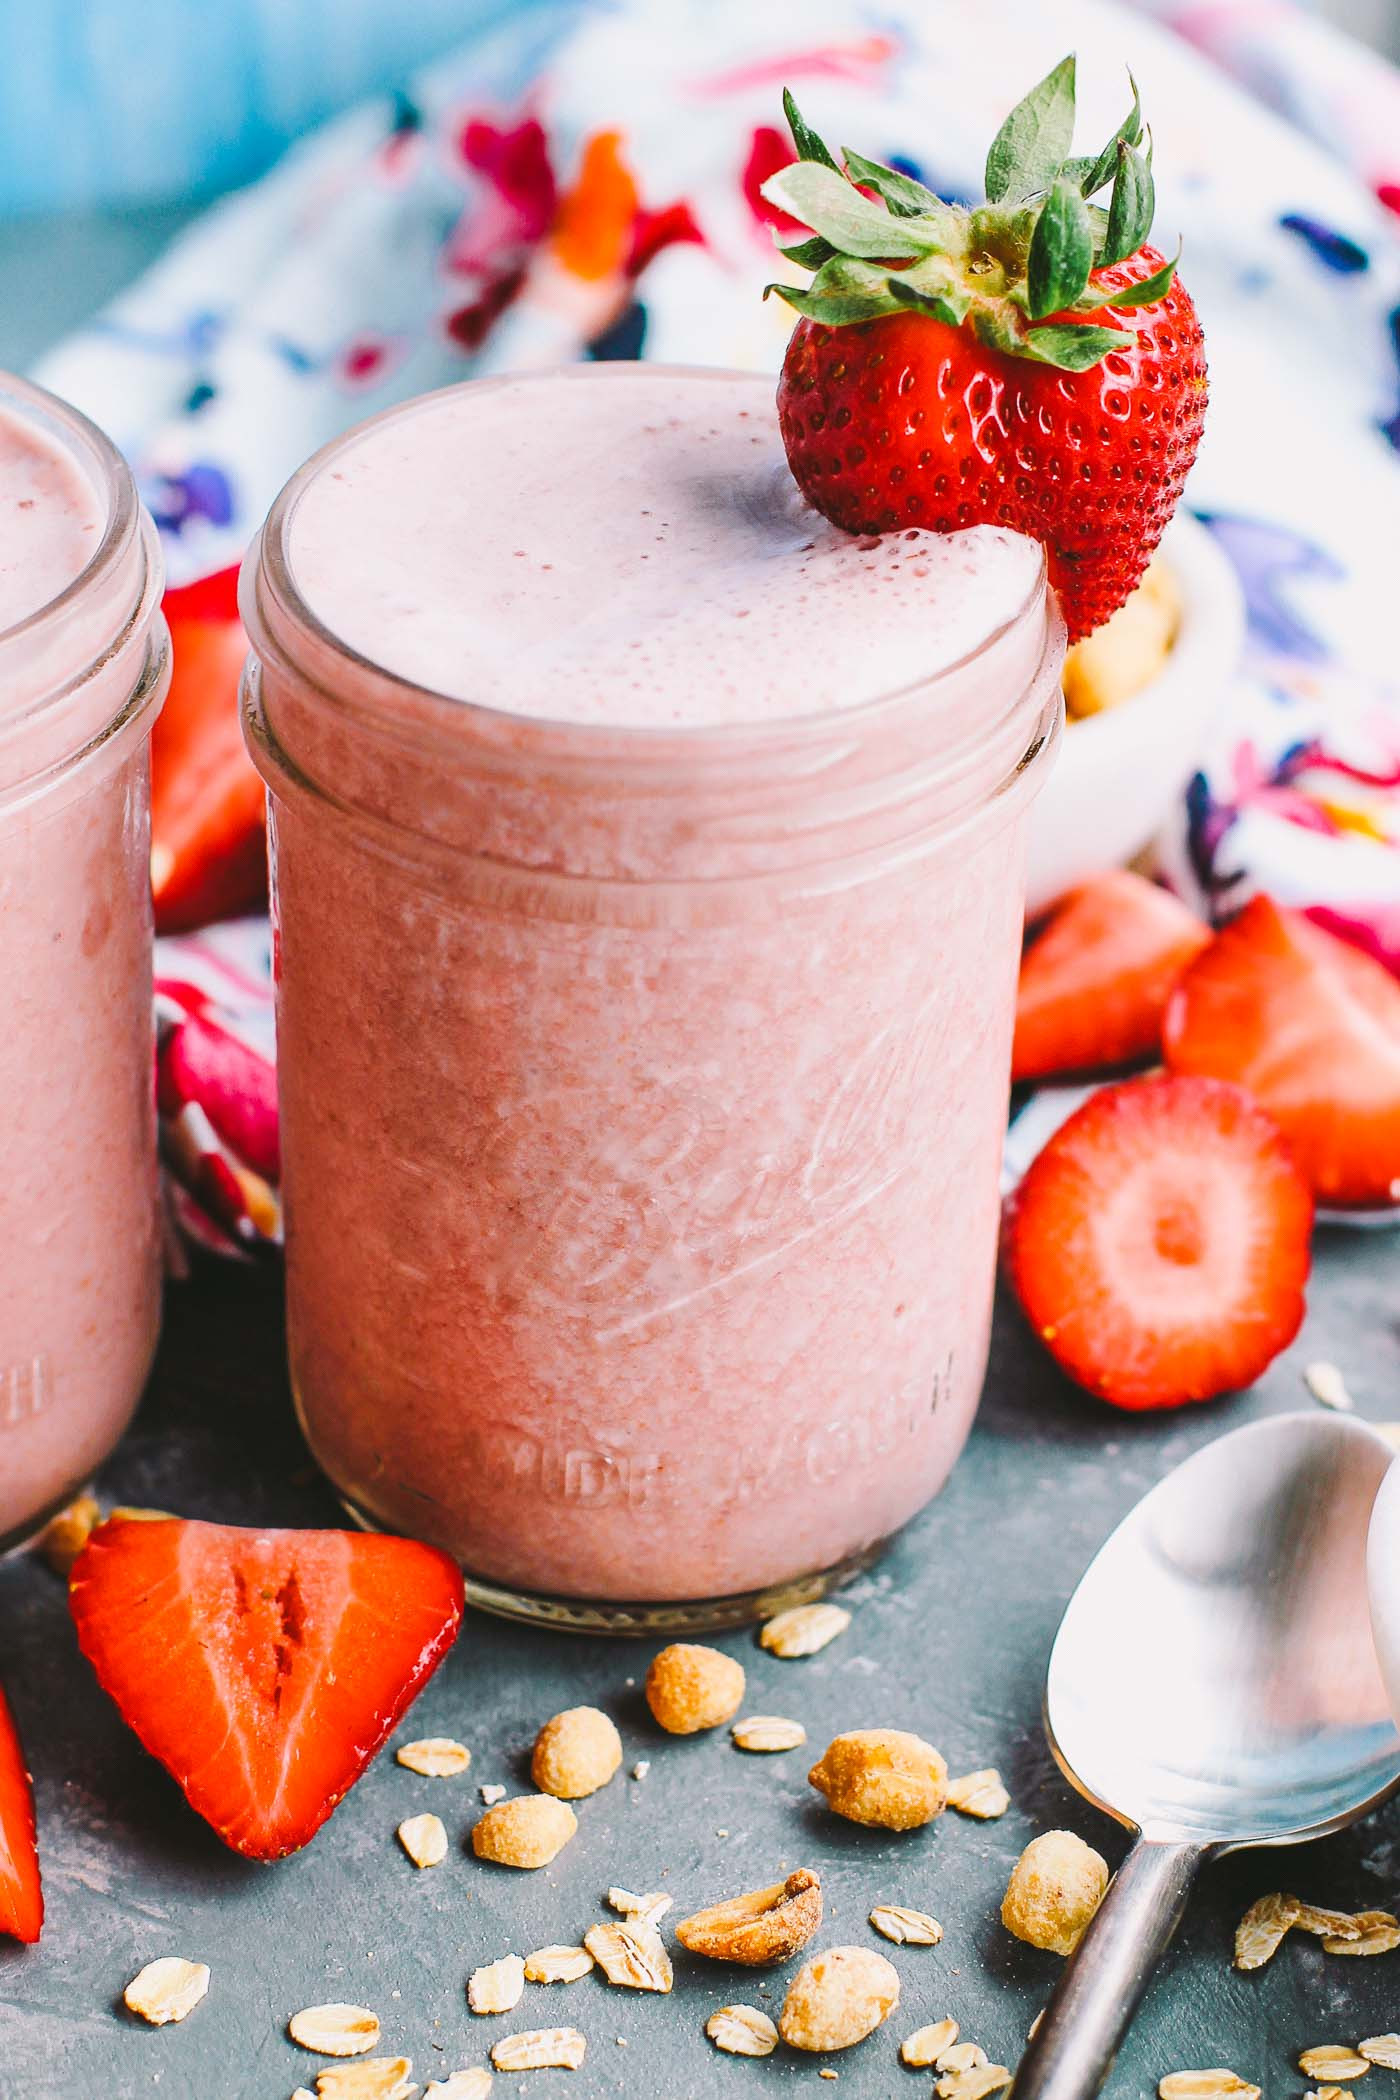 Healthy Breakfast Smoothies Recipes
 strawberry pb&j protein smoothies plays well with butter